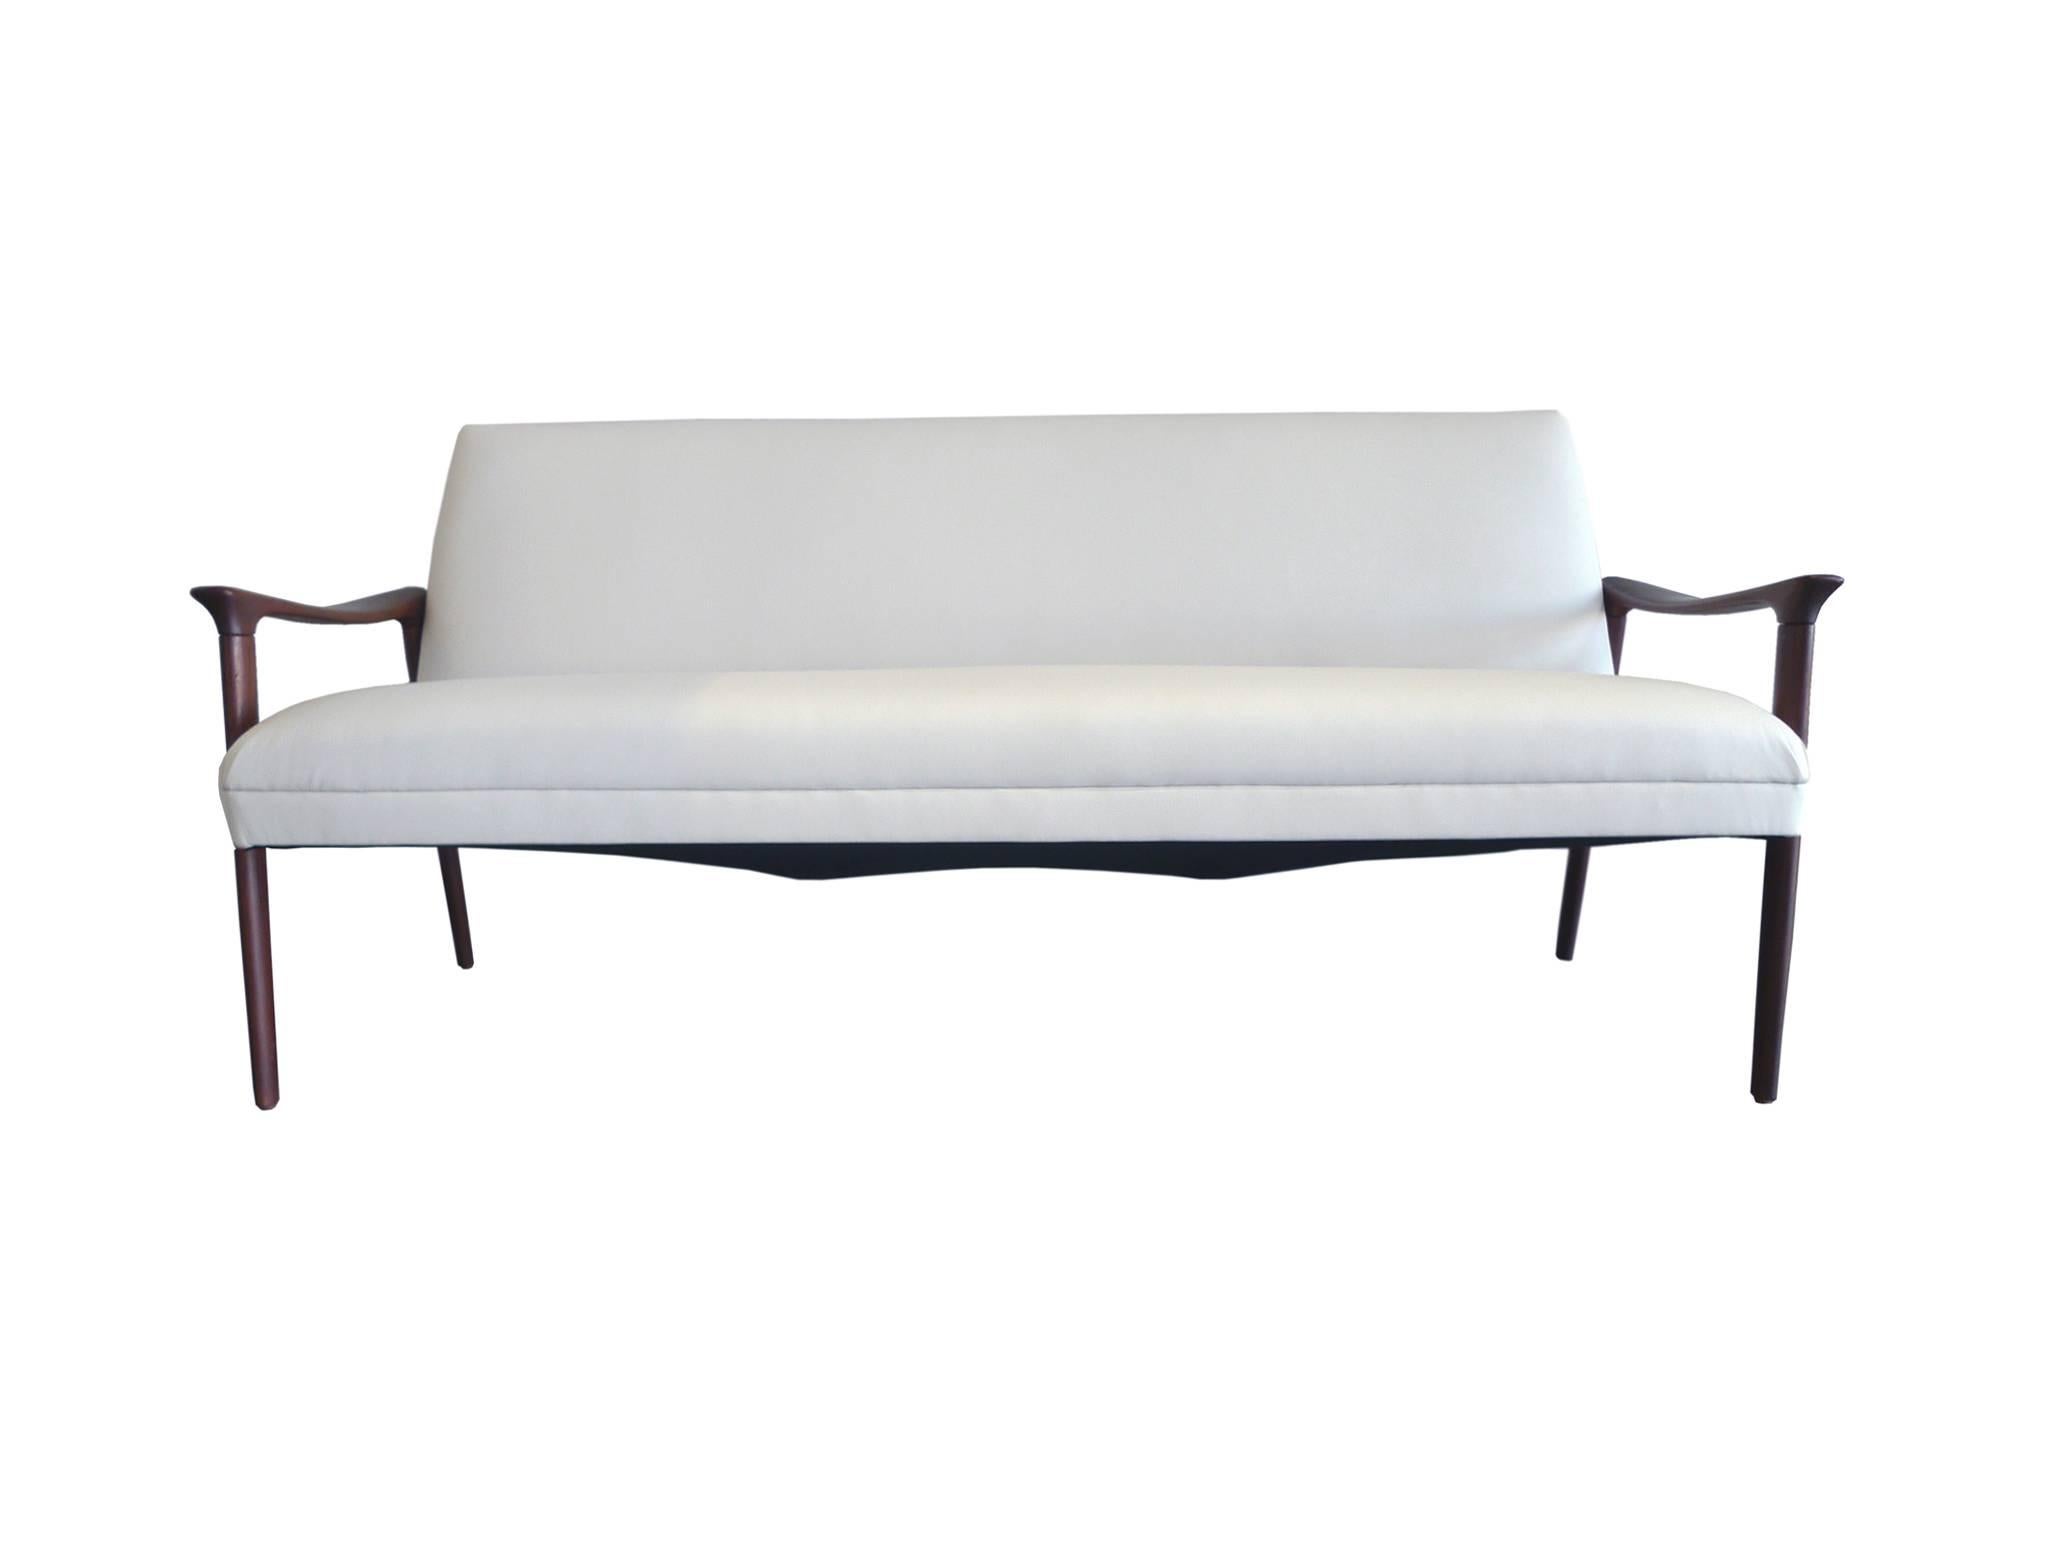 This handsome mid-20th century Danish sofa is by Ole Wanscher. It's newly refinished and reupholstered in white vinyl. The frame is a rich red-brown teak; its design is one of clean lines and soft edges. The arms are flat and elegantly slope, while